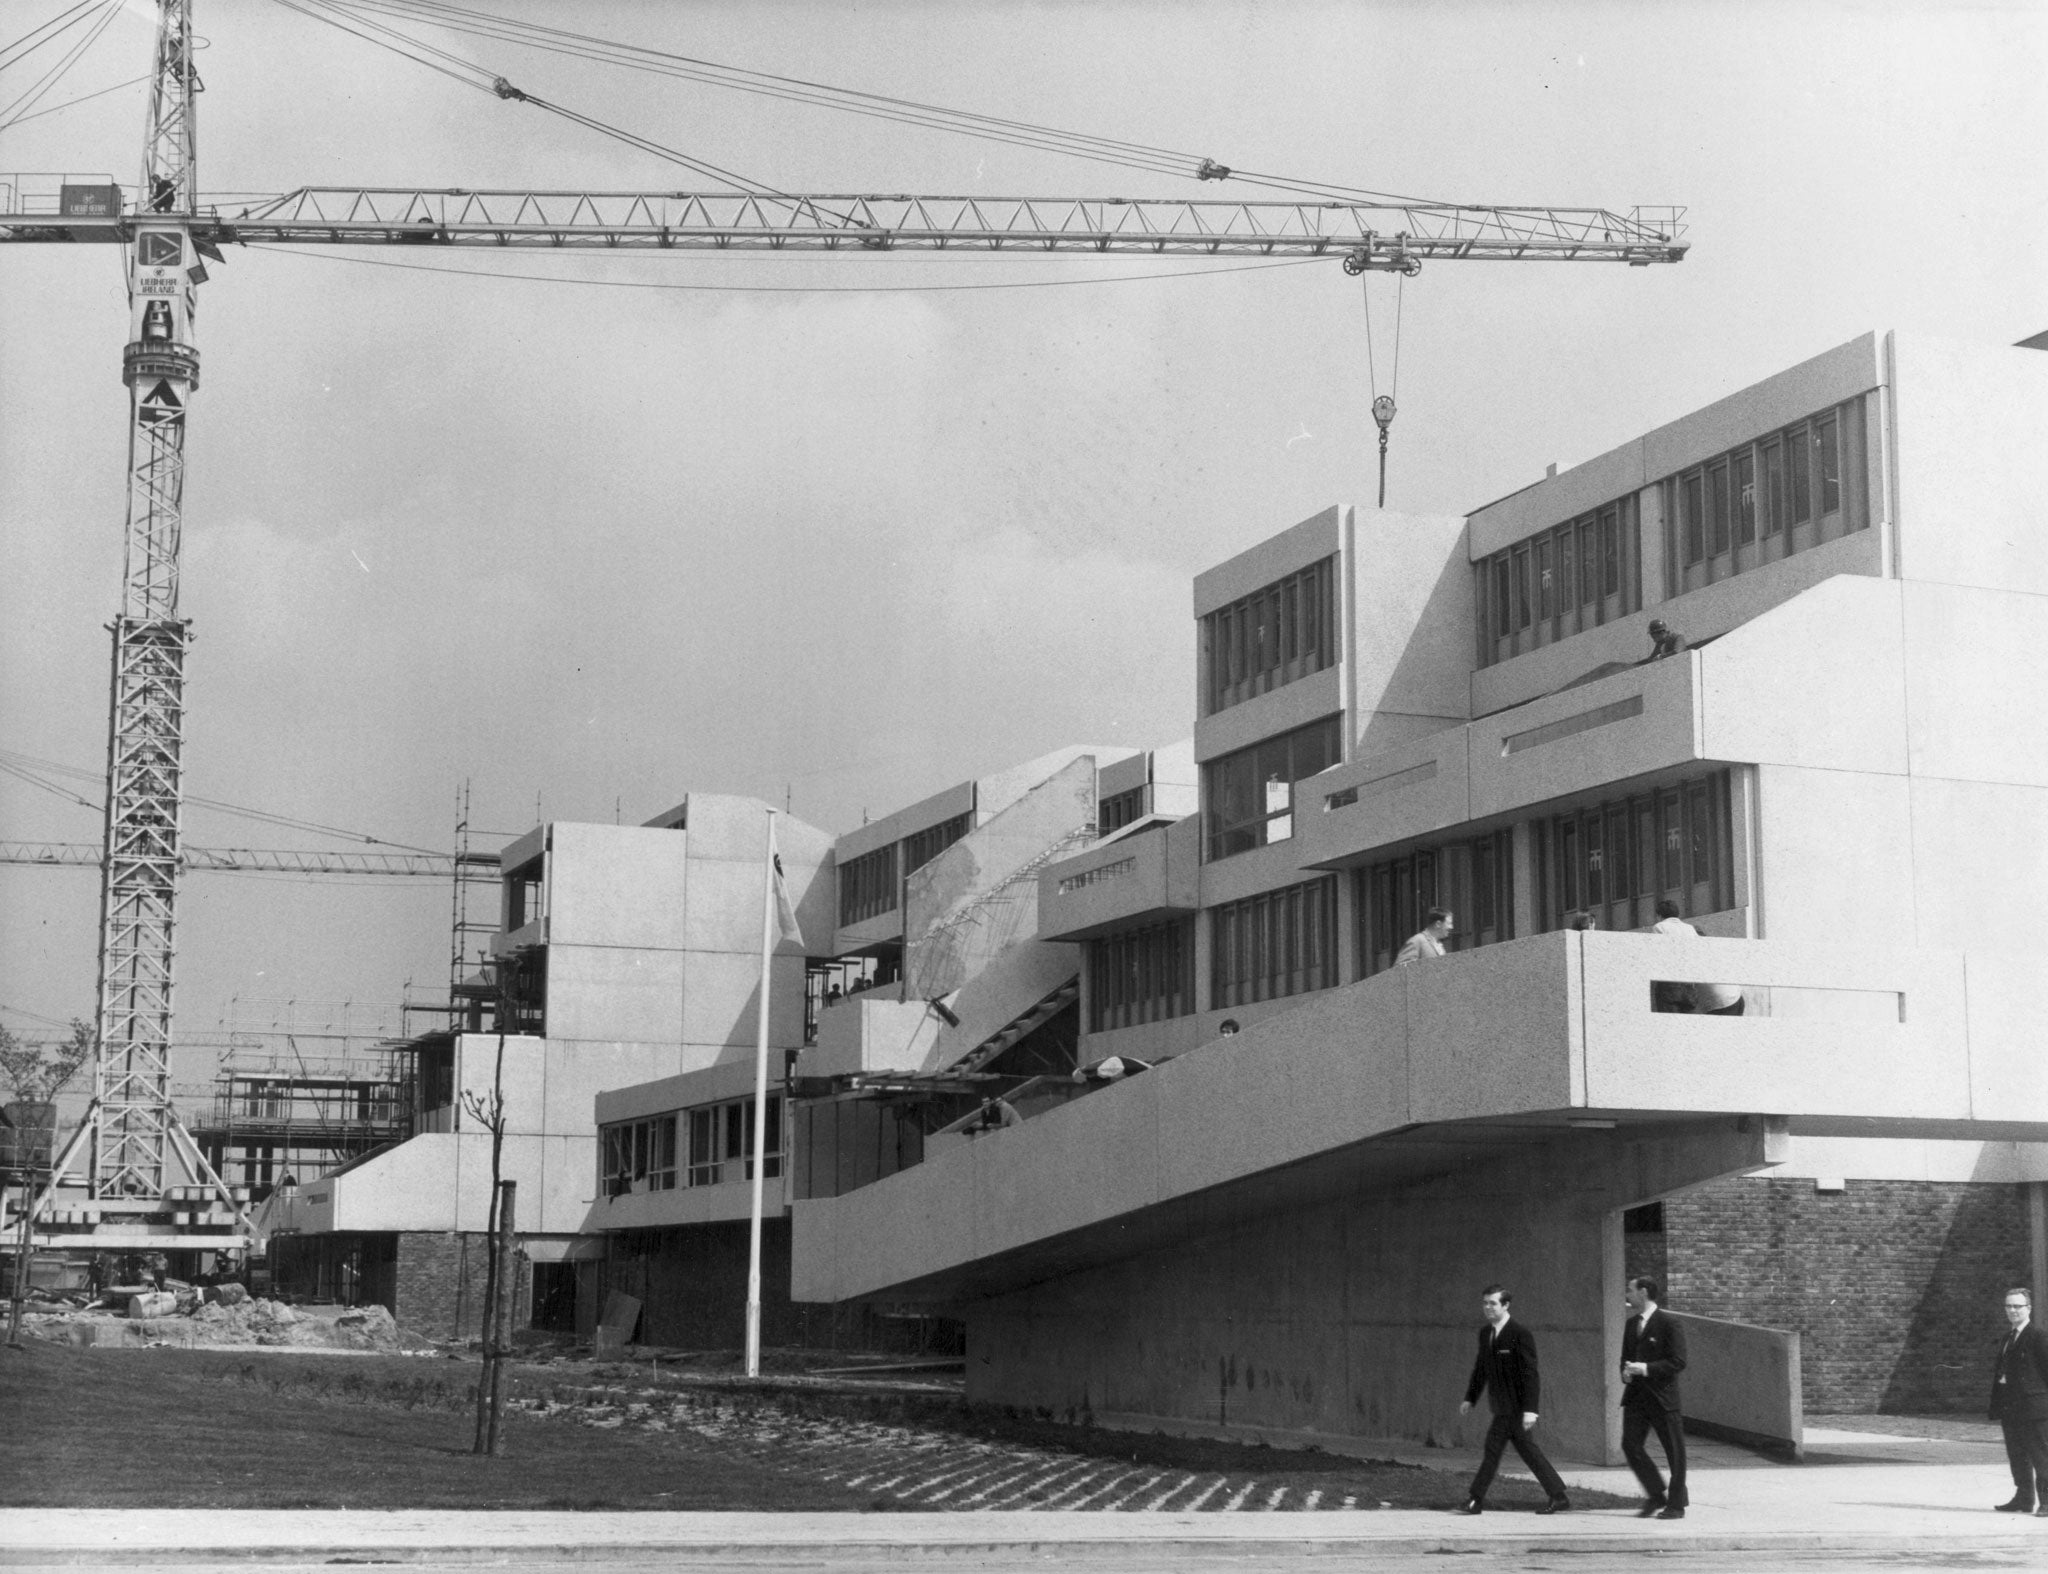 It was never meant to be this way: Construction on the Thamesmead council estate in the late 1950s.